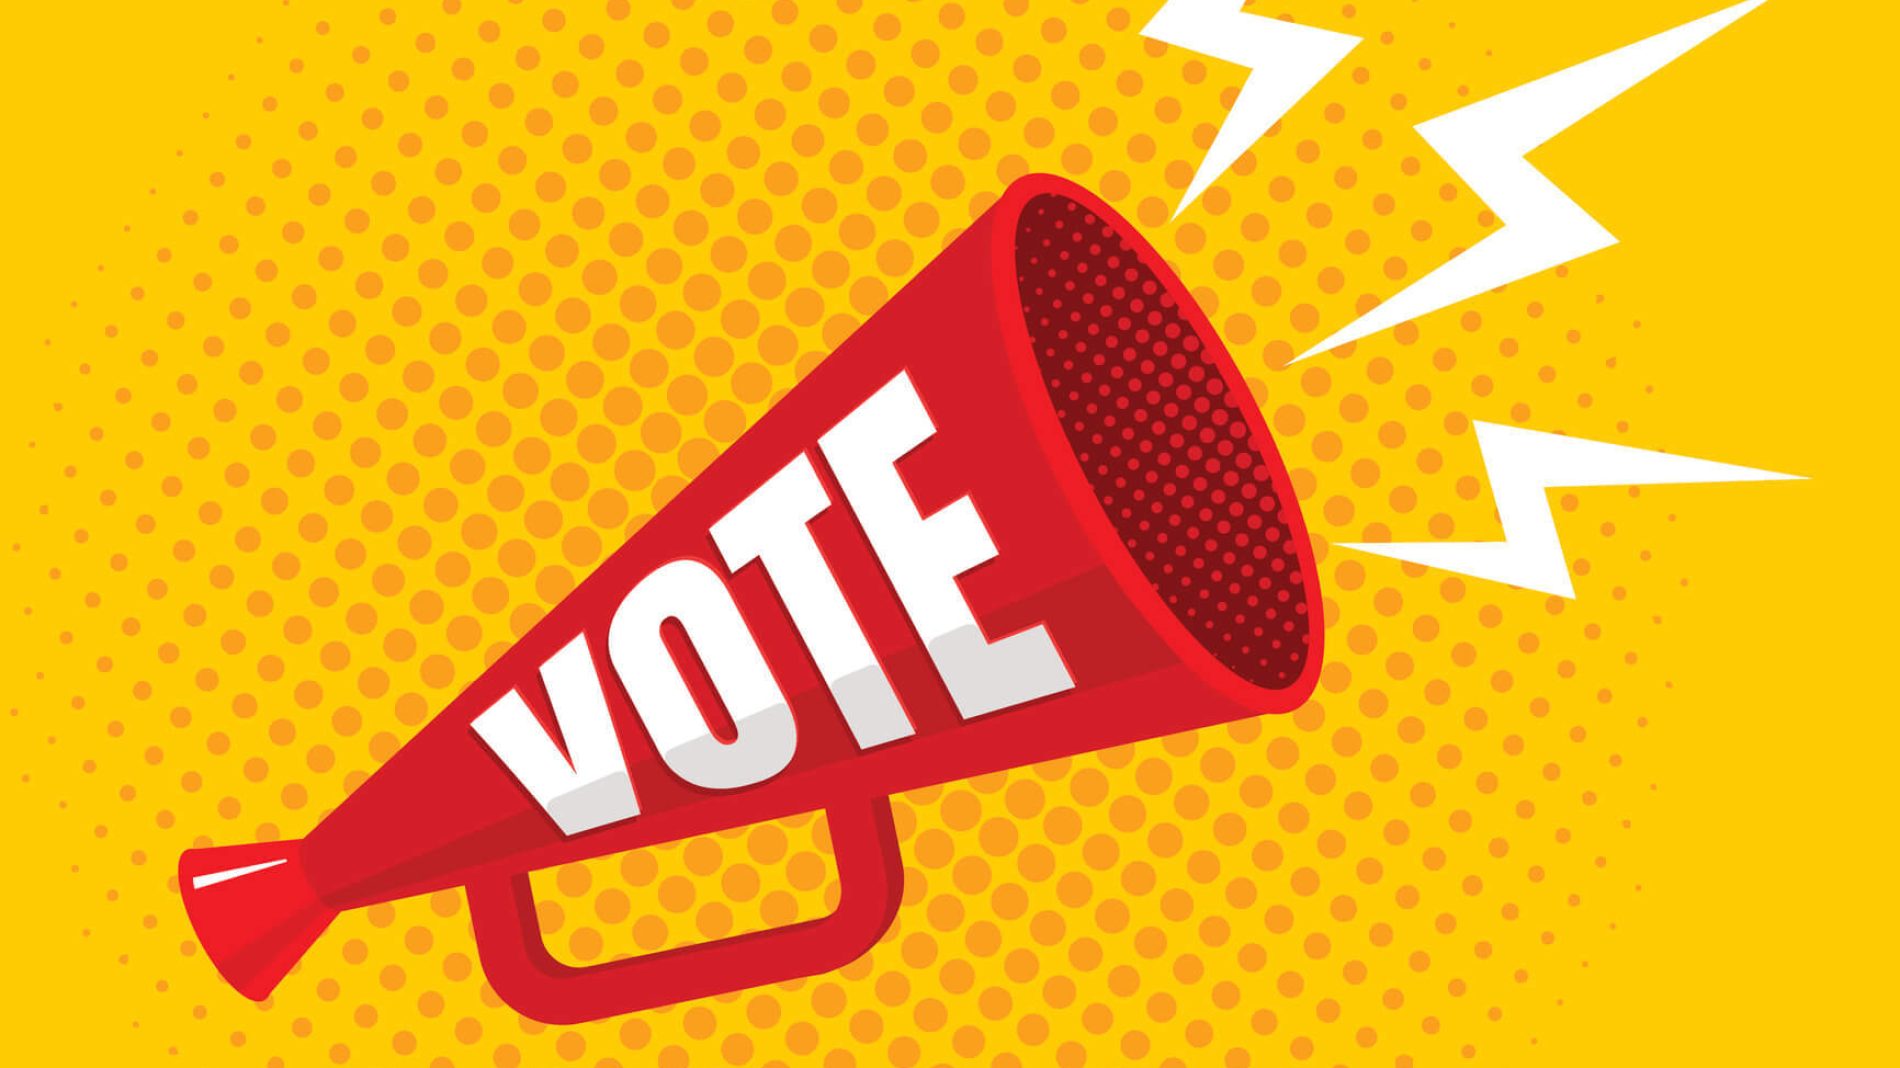 Megaphone with vote written on it against a yellow background